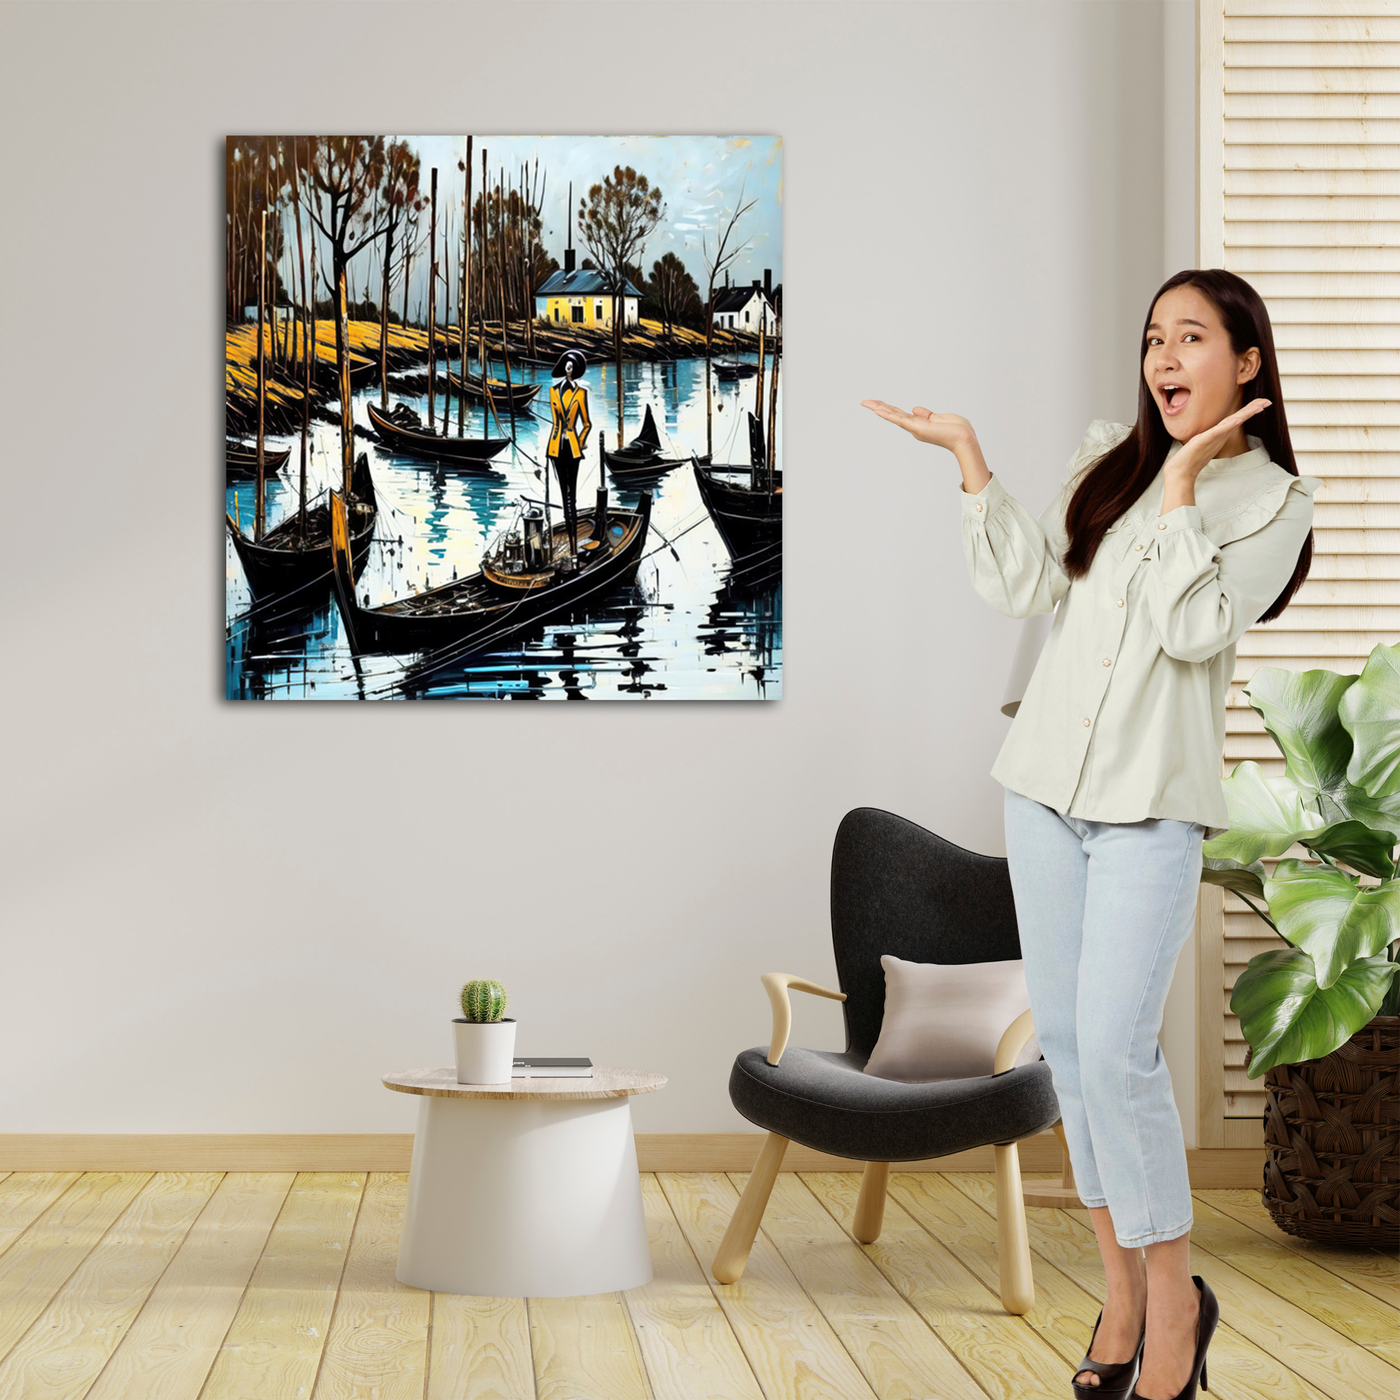 Boating On the River - Gallery Wrapped Canvas